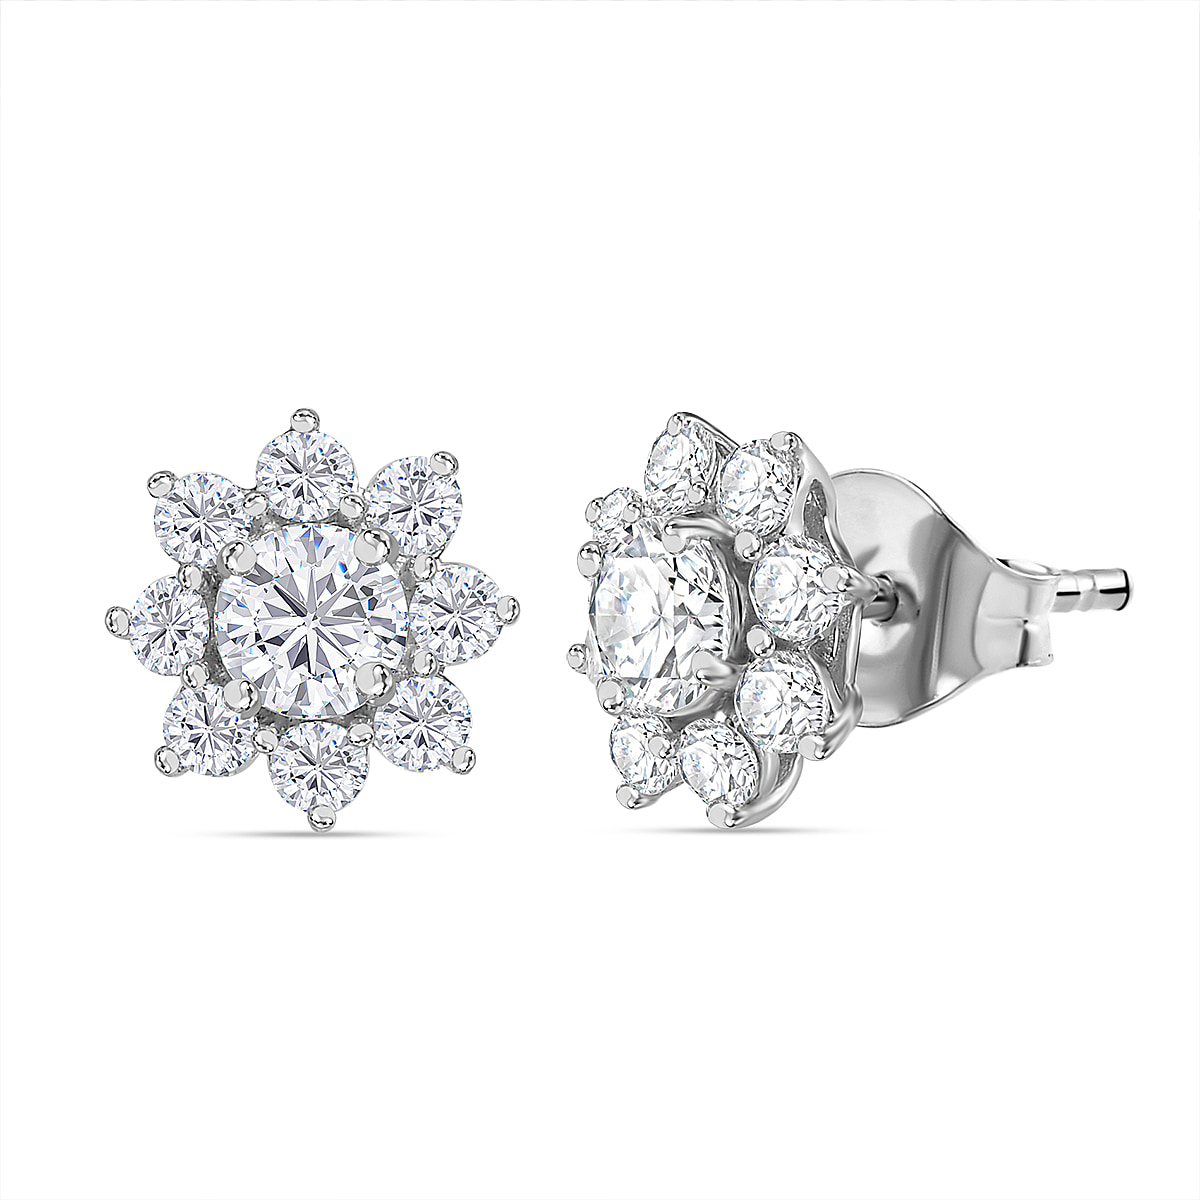 Moissanite Floral Stud Earrings in Rhodium Overlay Sterling Silver 1.85 Ct